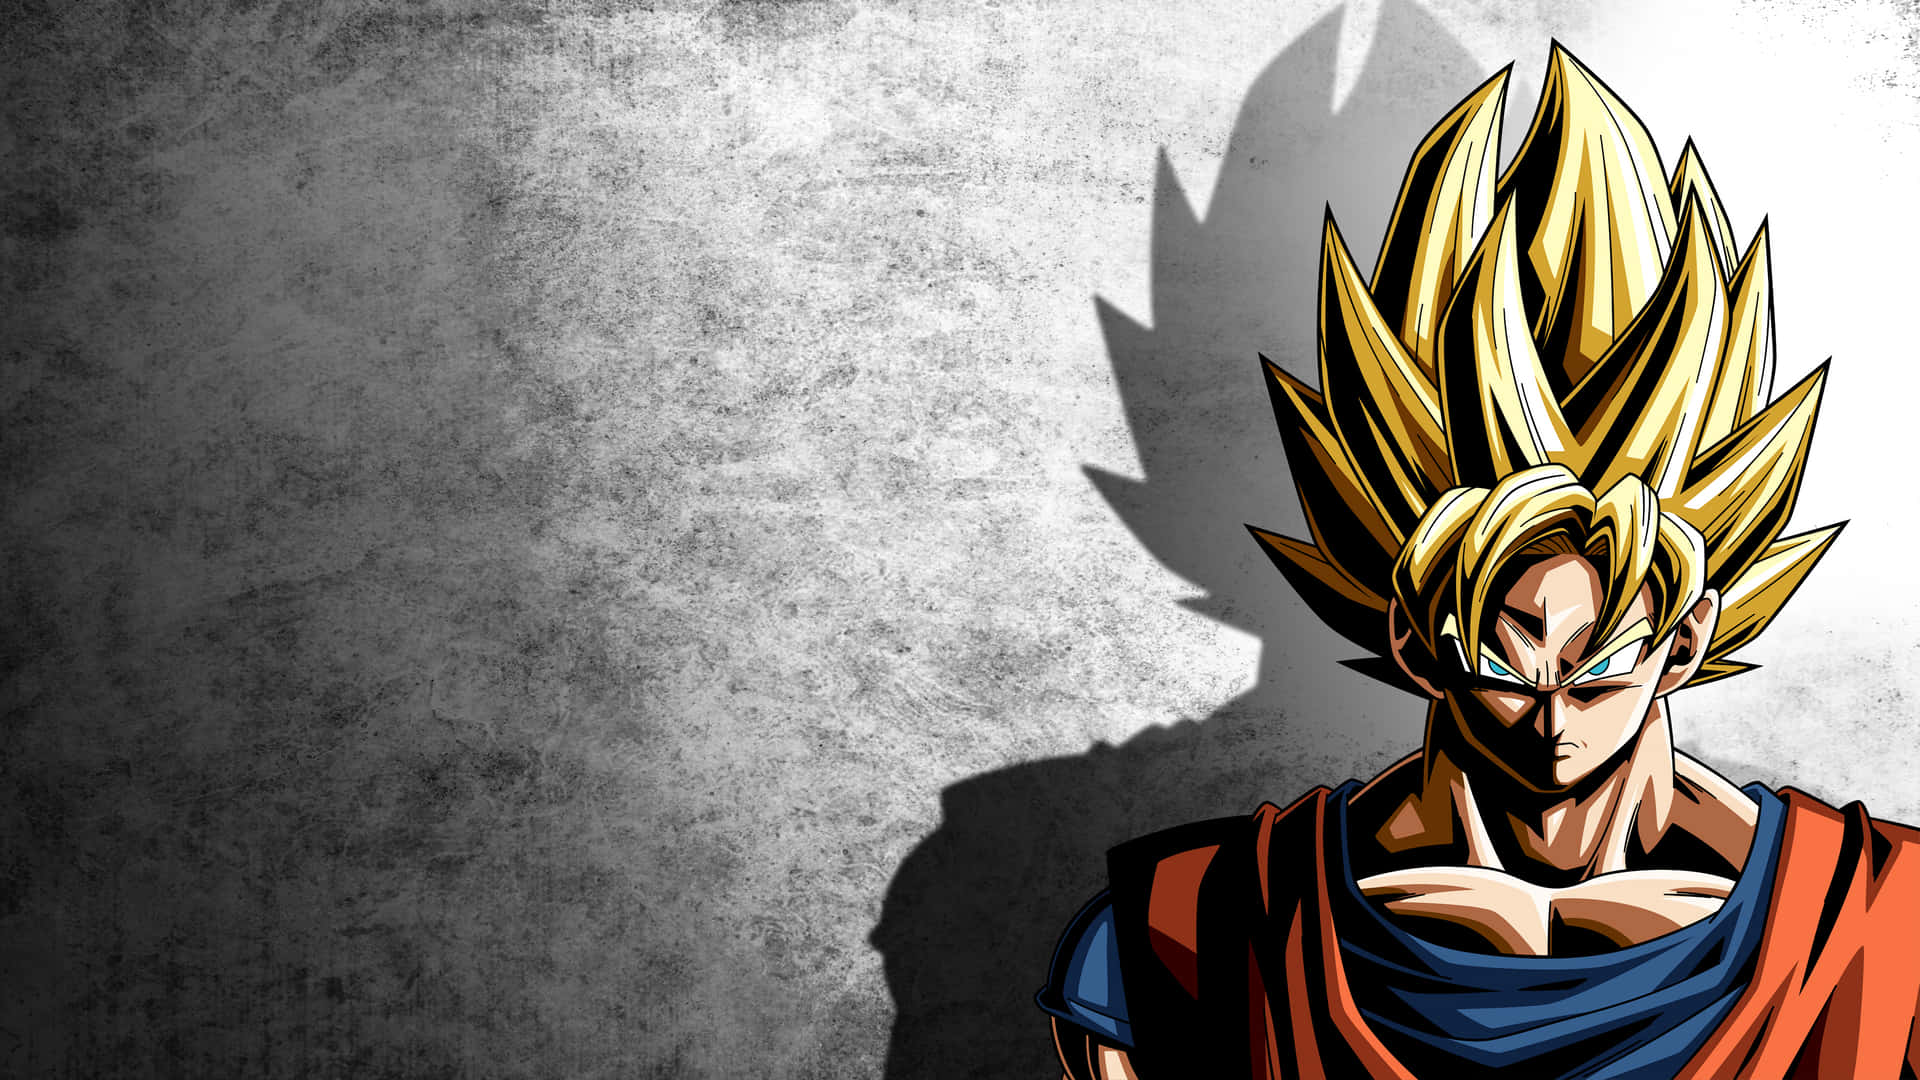 Harness the power of Dragon Ball Z to maximize your gaming experience on the 4K PC. Wallpaper